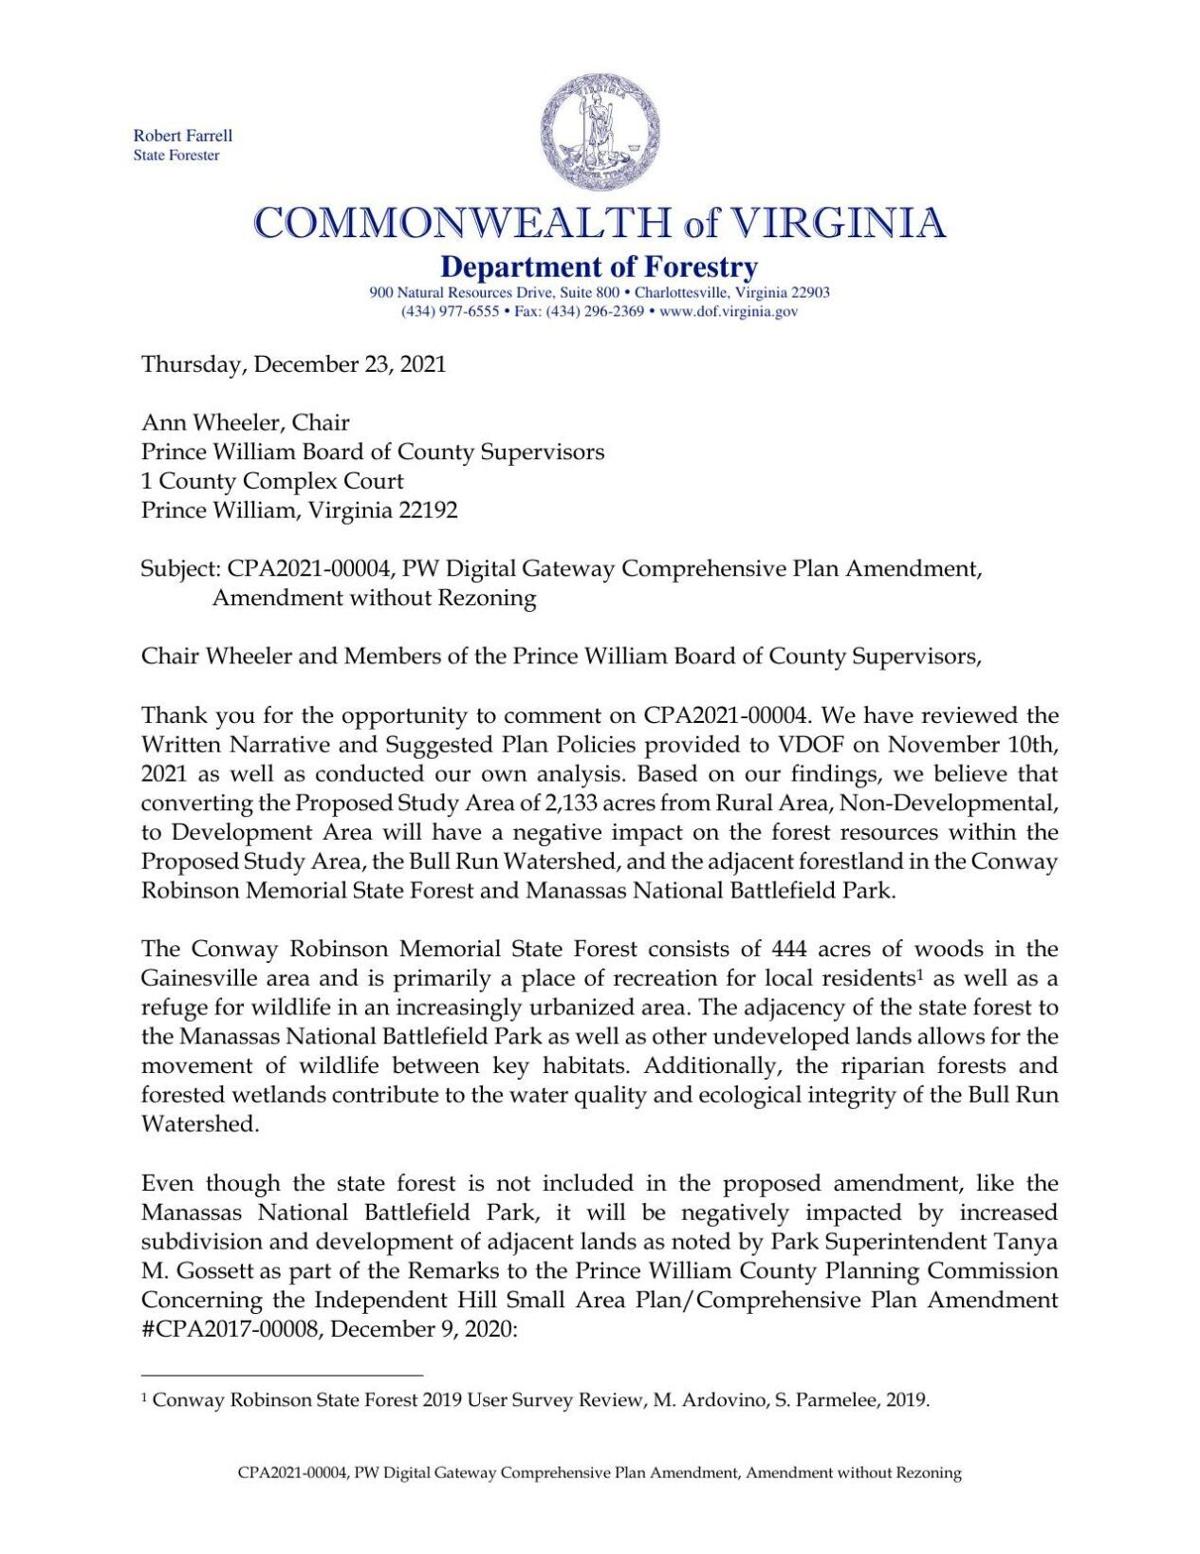 Letter from Virginia Department of Forestry about data center proposal